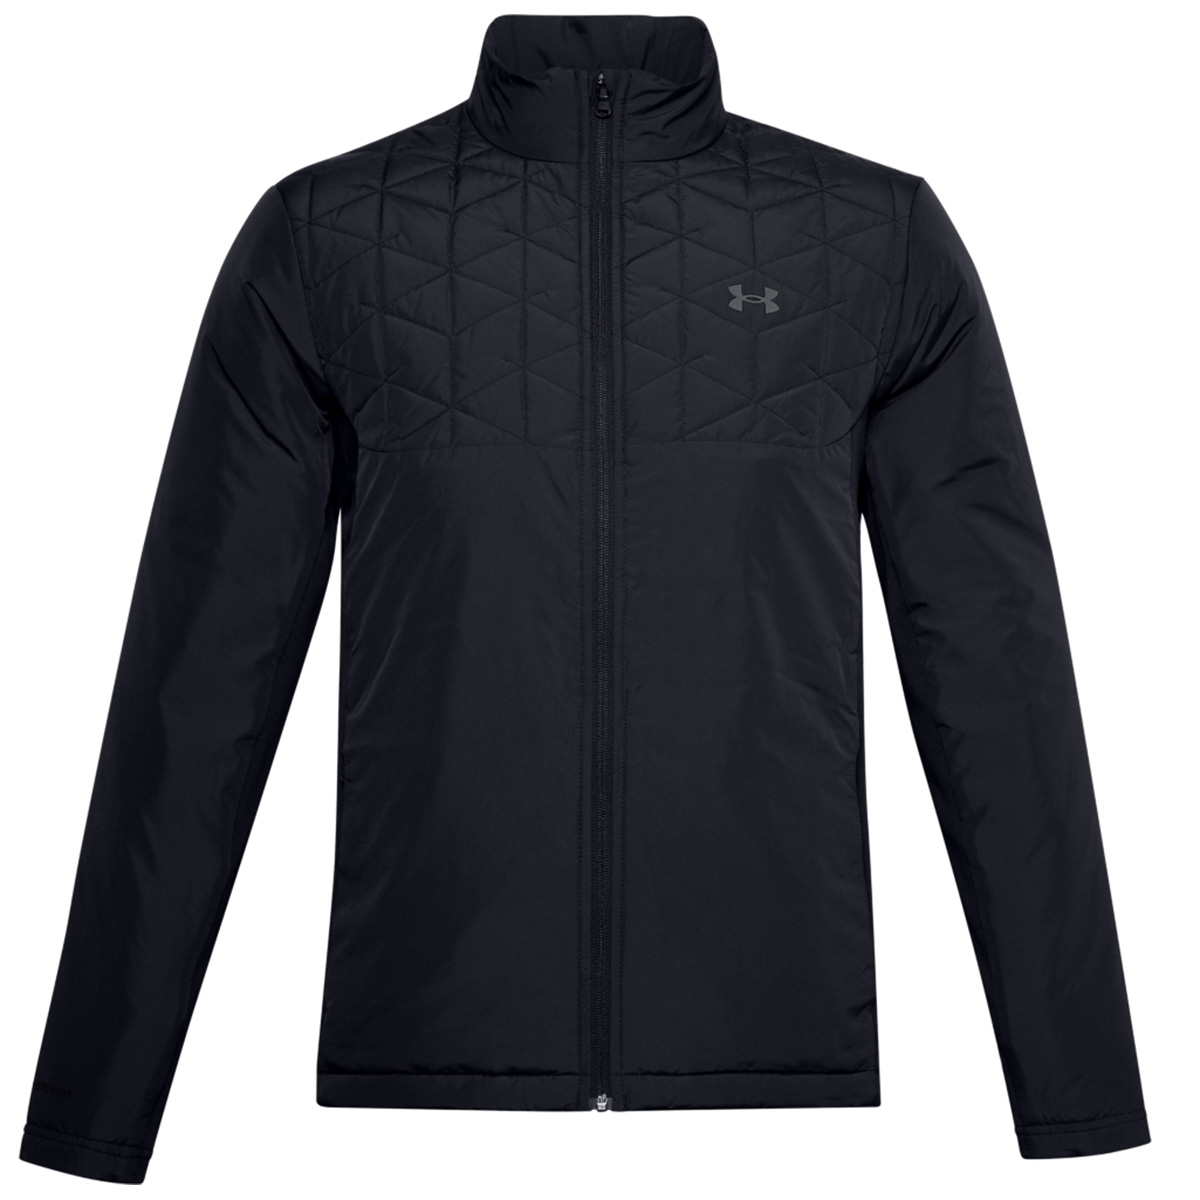 cold gear under armour jacket